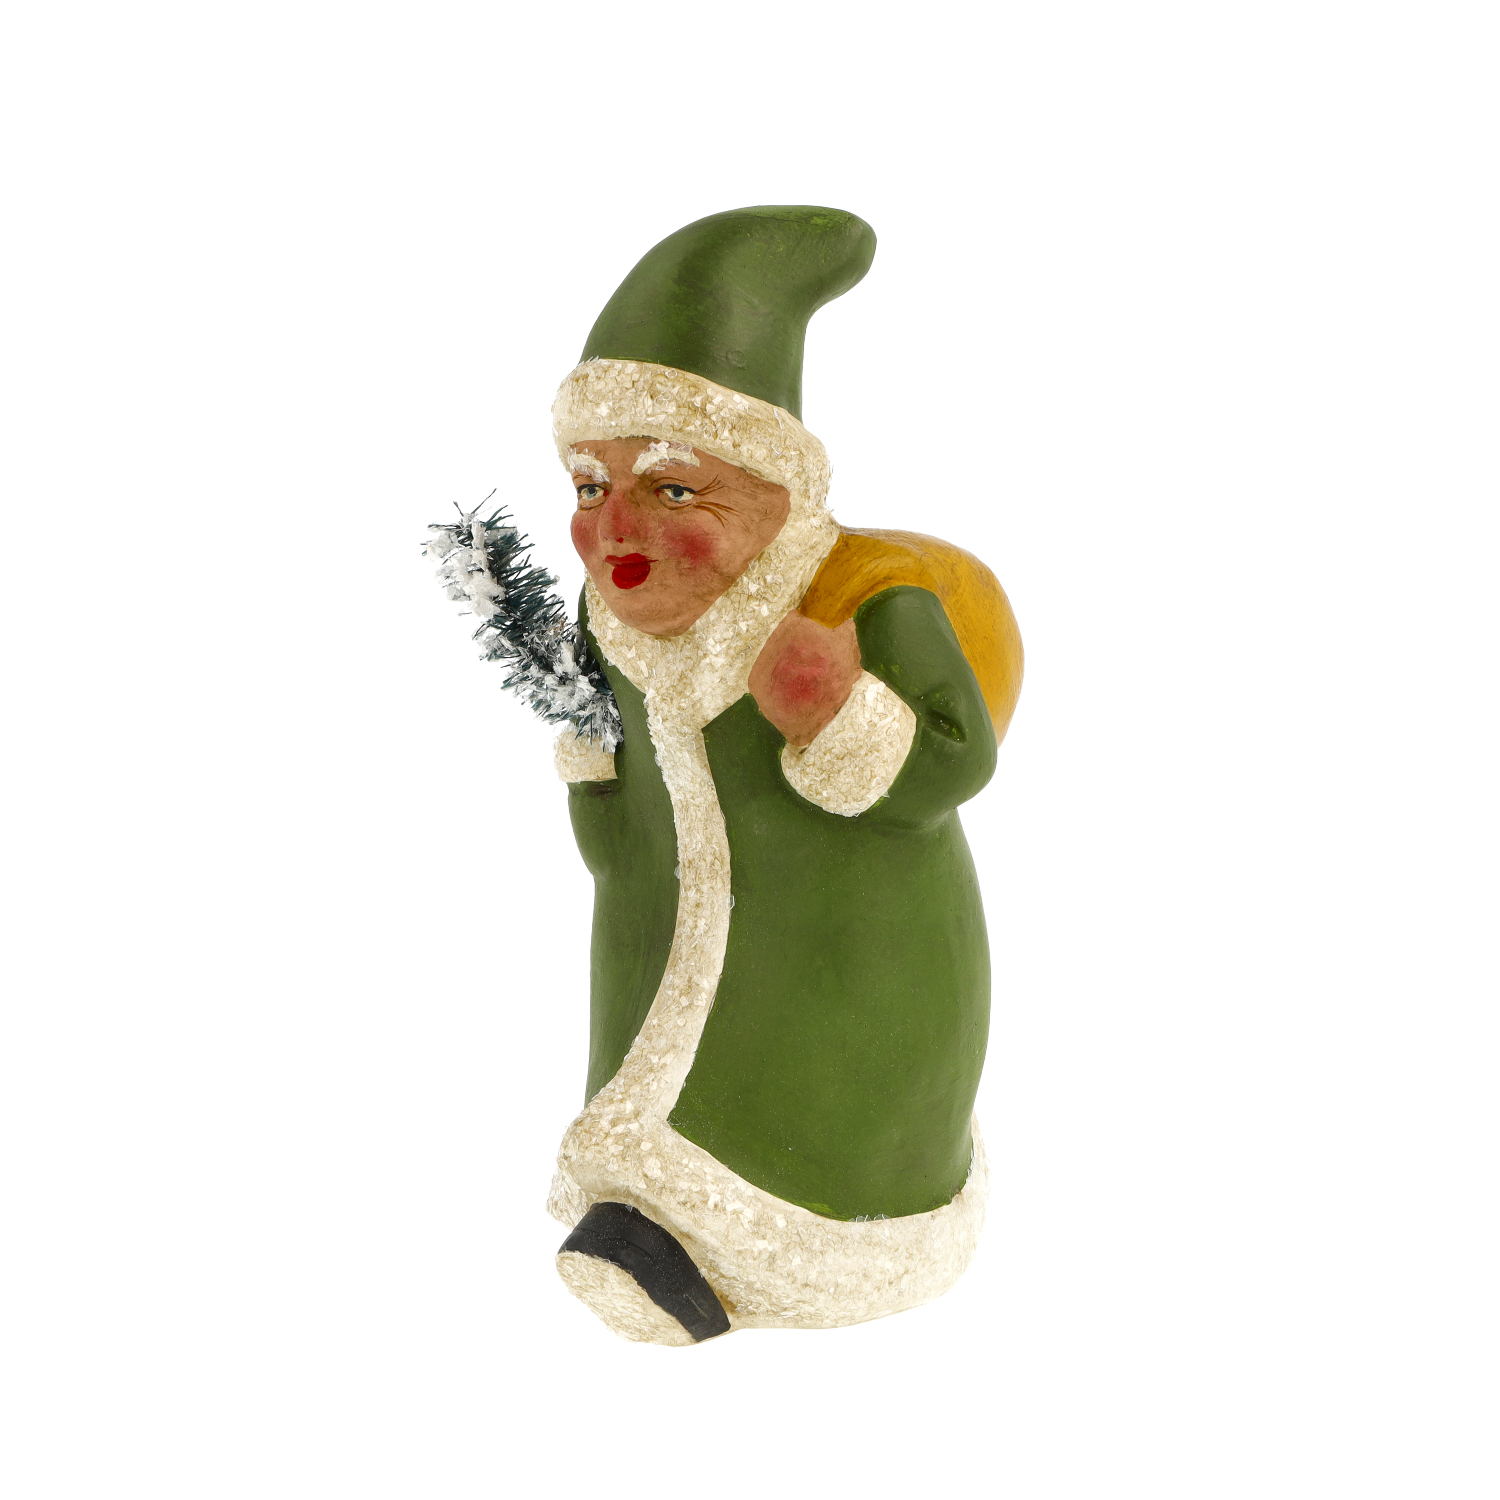 Hurrying Santa Claus with pointed hat and sack, H = 8 in., green